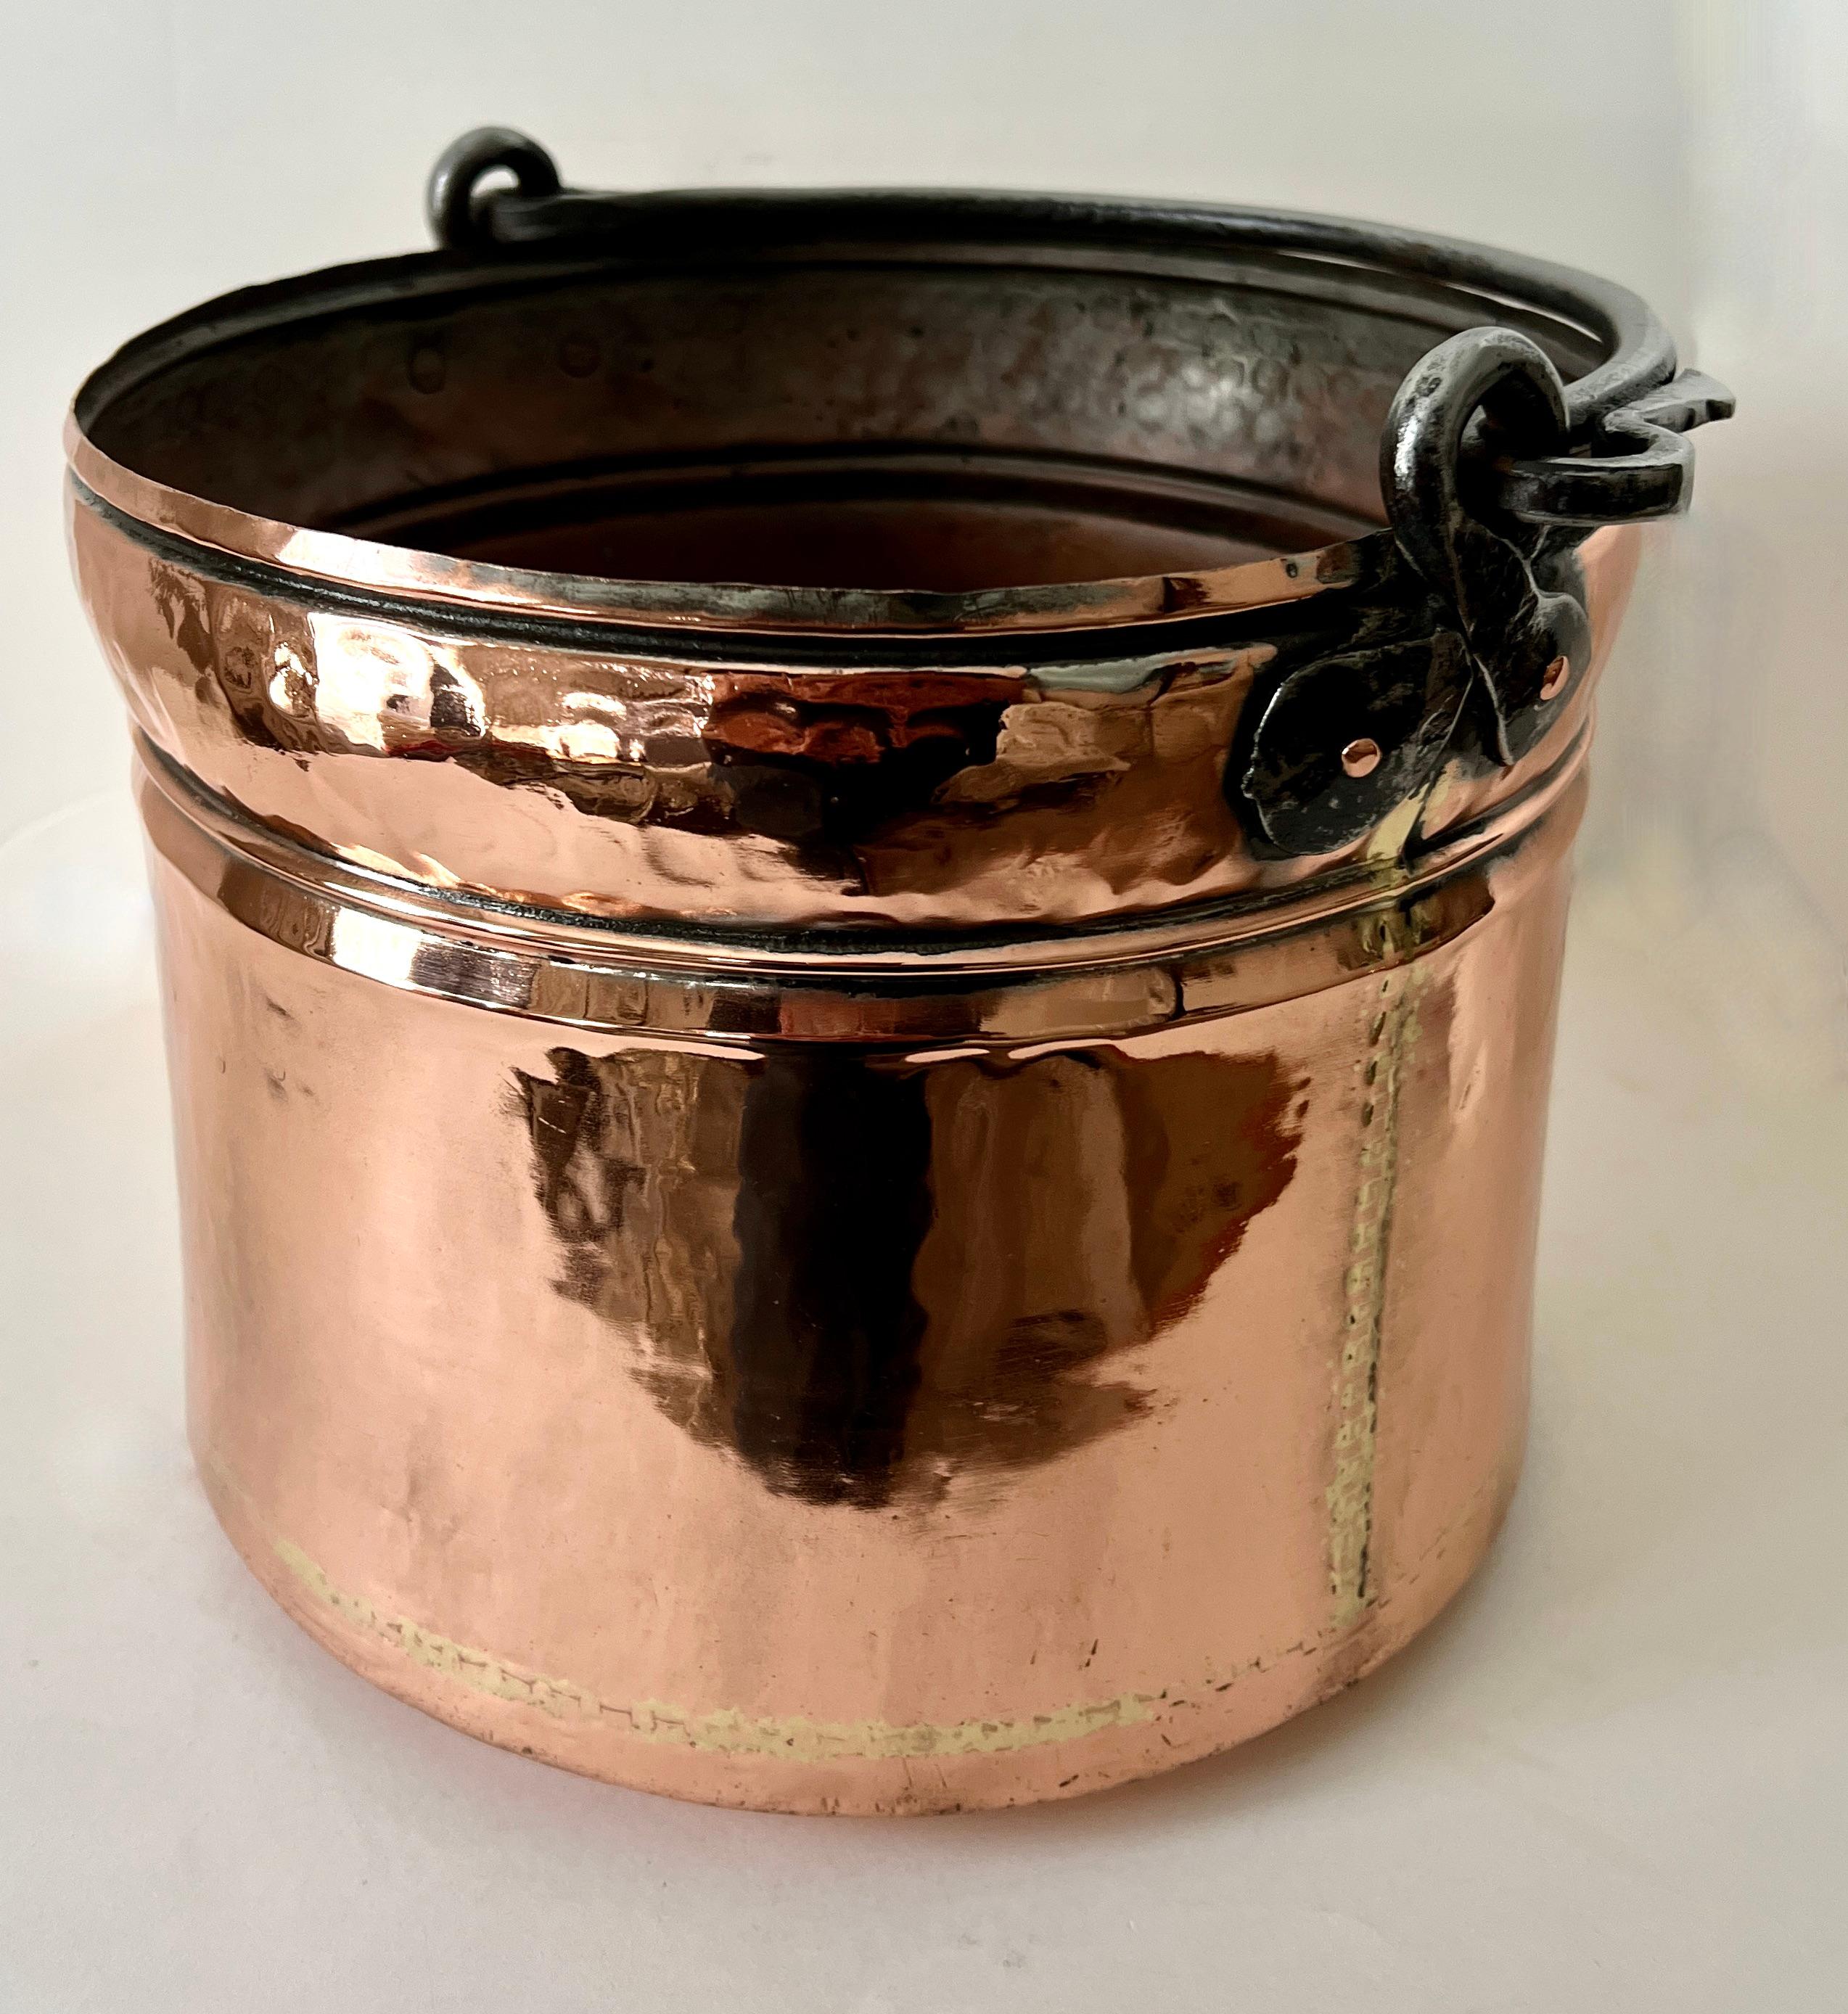 A large Copper stew pot, polished and from the 19th Century.  

The pot looks great hanging as a decorative piece in a New England kitchen or you can use it as a centerpiece, jardiniere or planter...

A compliment to many spaces and also wonderful